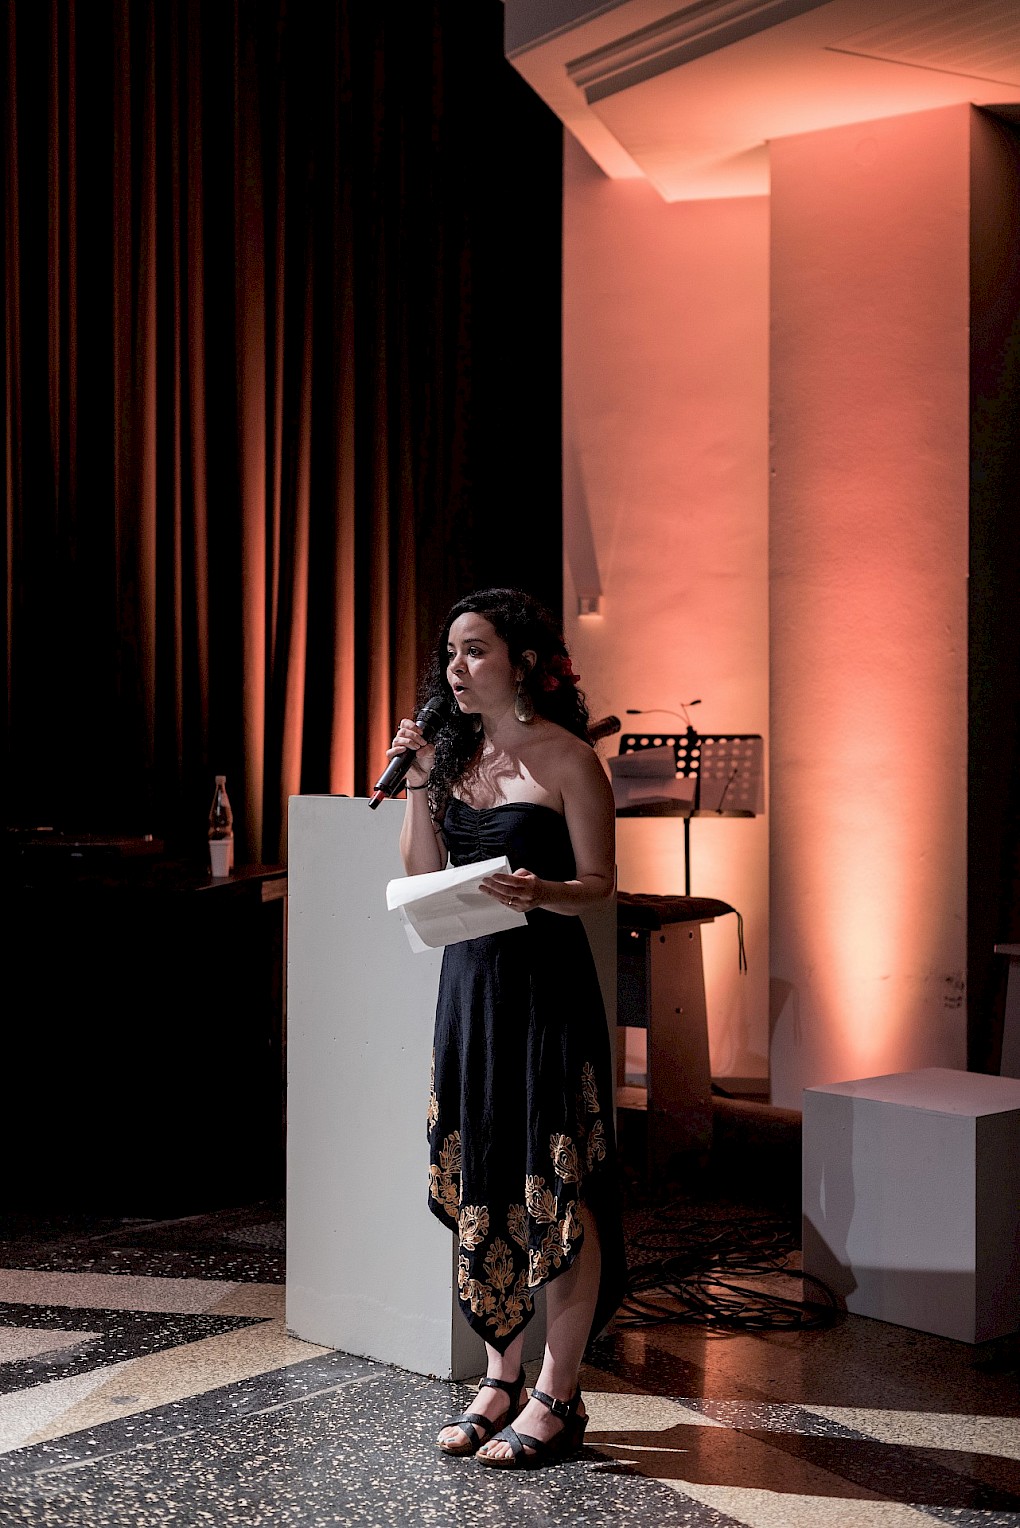 Introduction by Raisa Galofre | Photo: Marvin Systermans